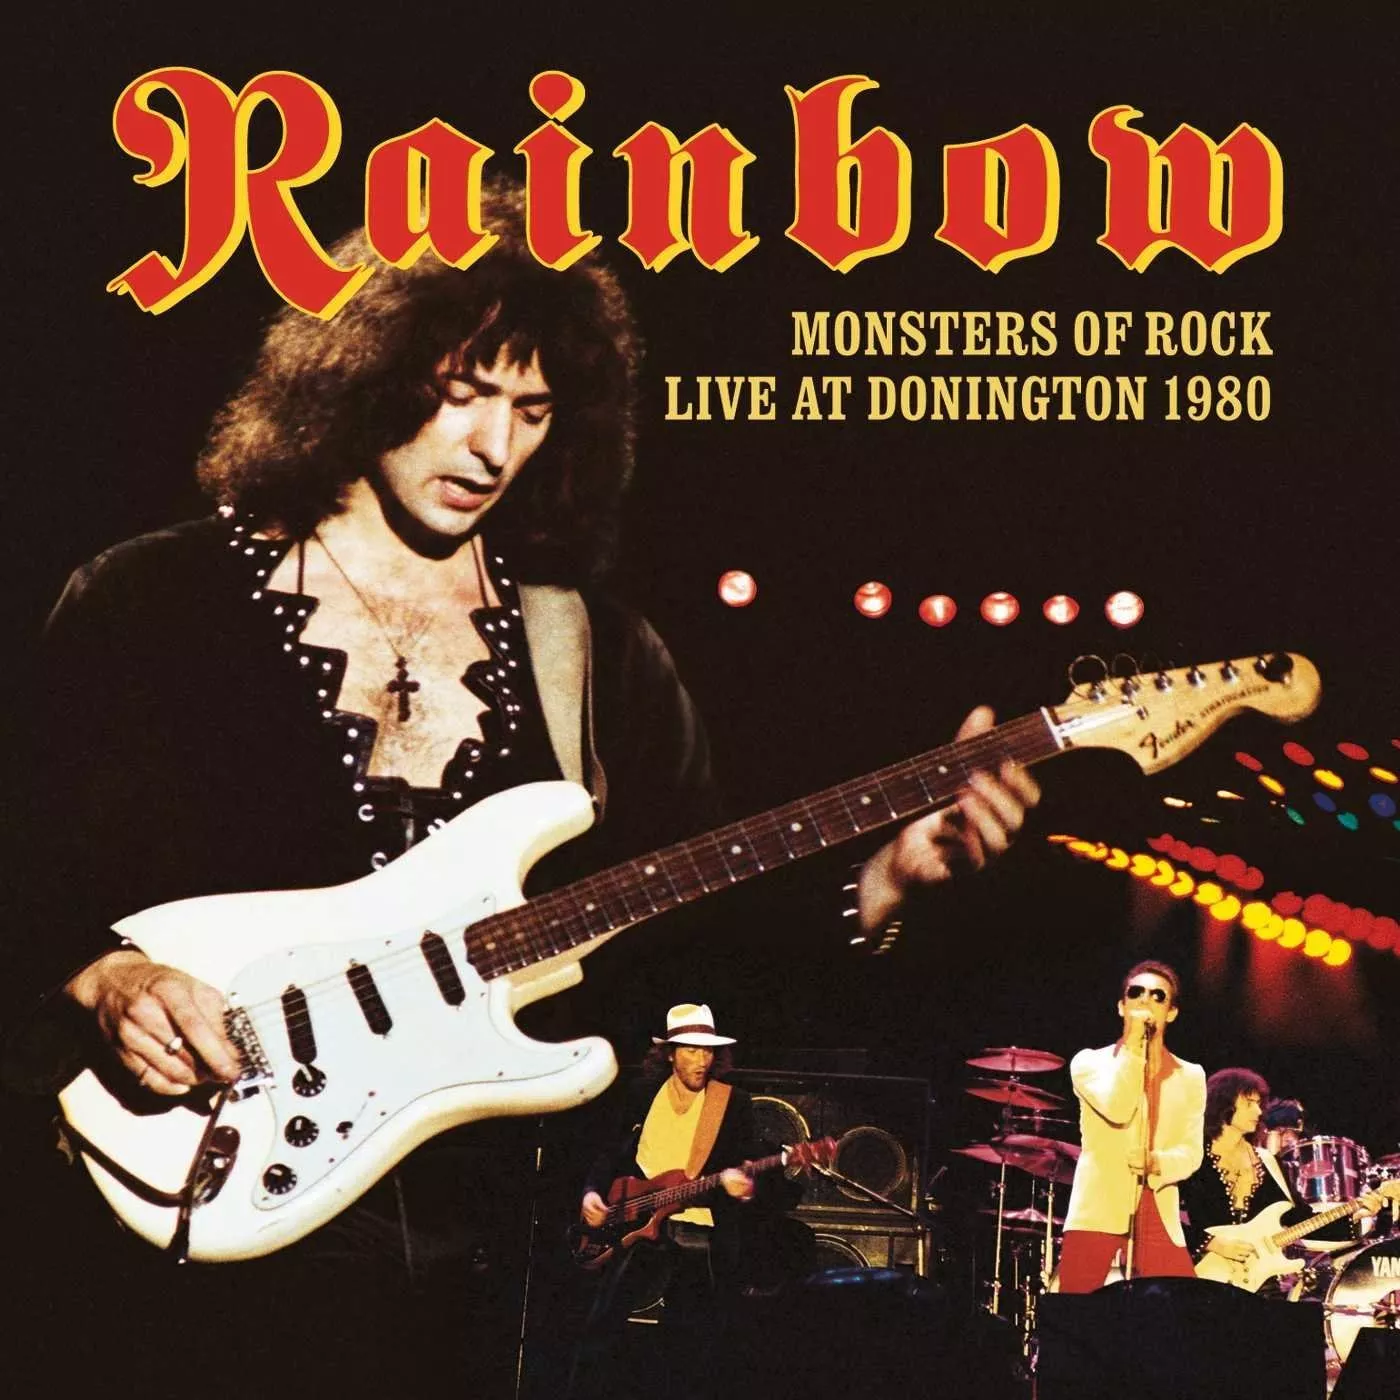 Monsters of Rock – Live at Donnington 1980 (dvd/cd) - Rainbow